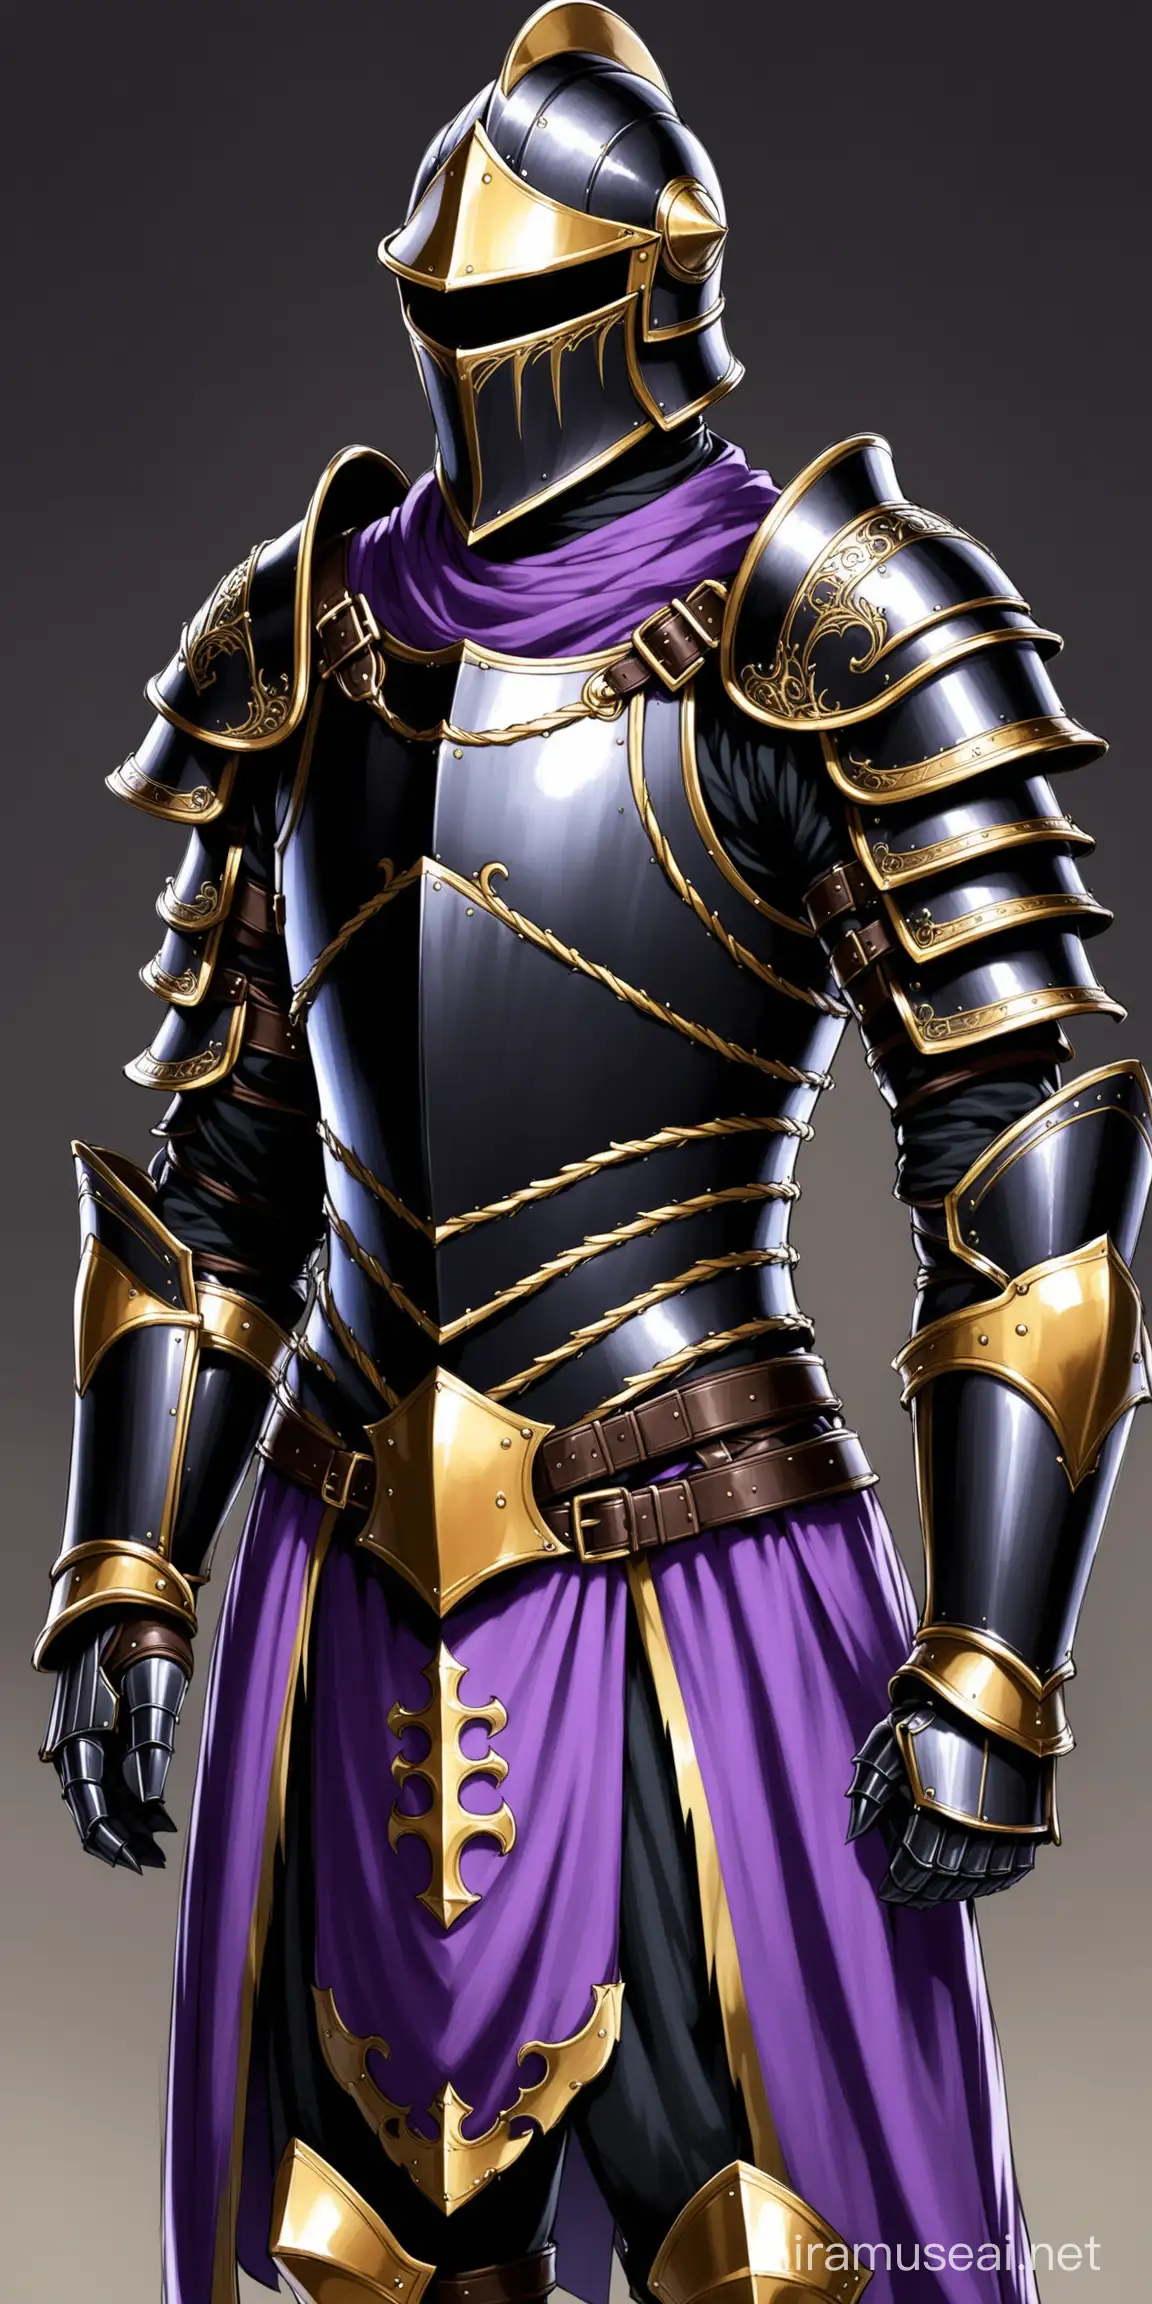 Male Medieval Obsidian Knight Armor with Gold and Purple Accents